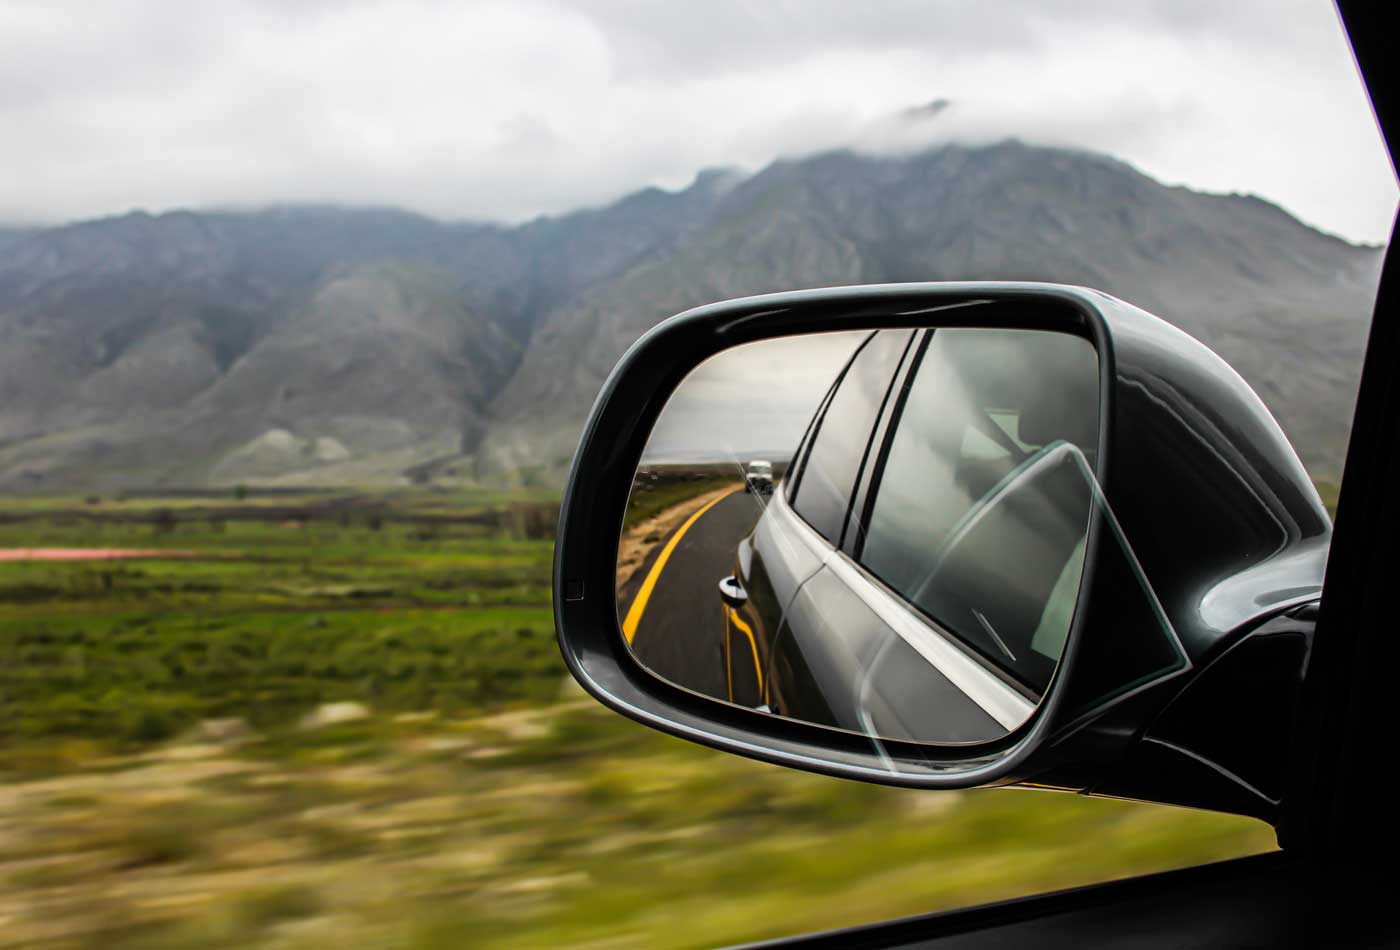 Driving school business insurance - Shows a side view mirror on a car